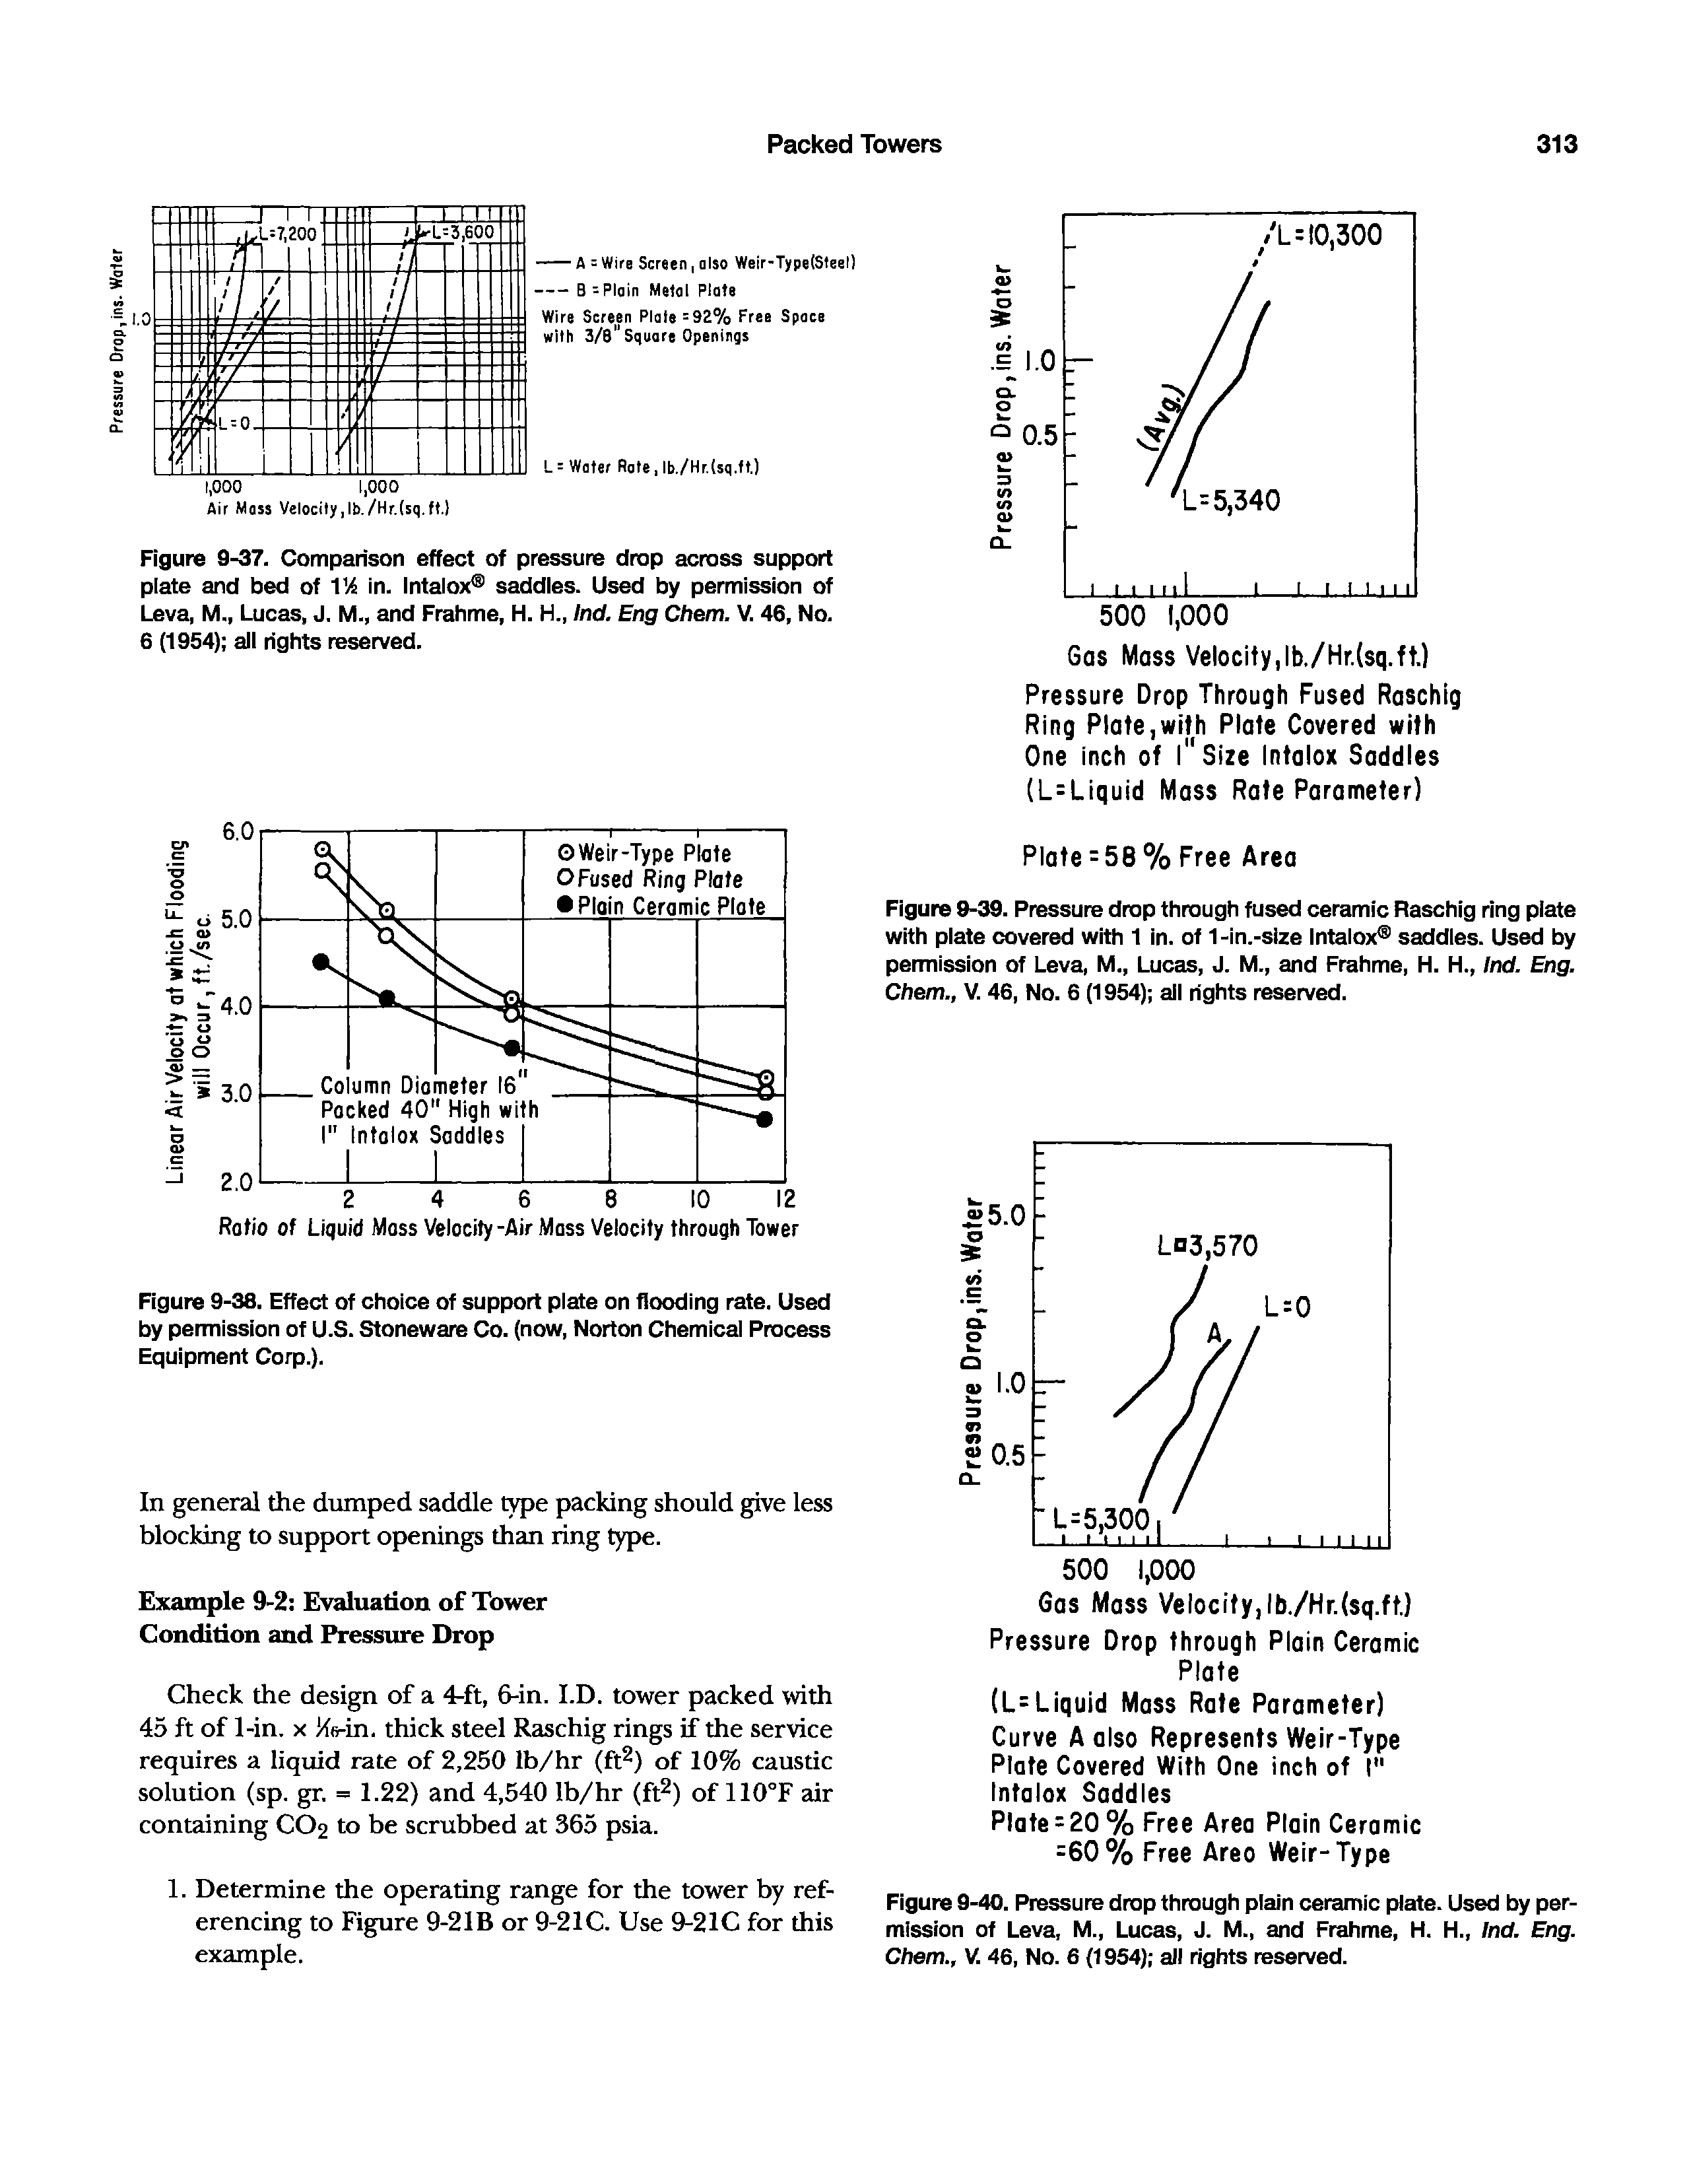 Figure 9-40. Pressure drop through piain ceramic plate. Used by permission of Leva, M., Lucas, J. M., and Frahme, H. H., Ind. Eng. Chem., V. 46, No. 6 (1954) all rights reserved.